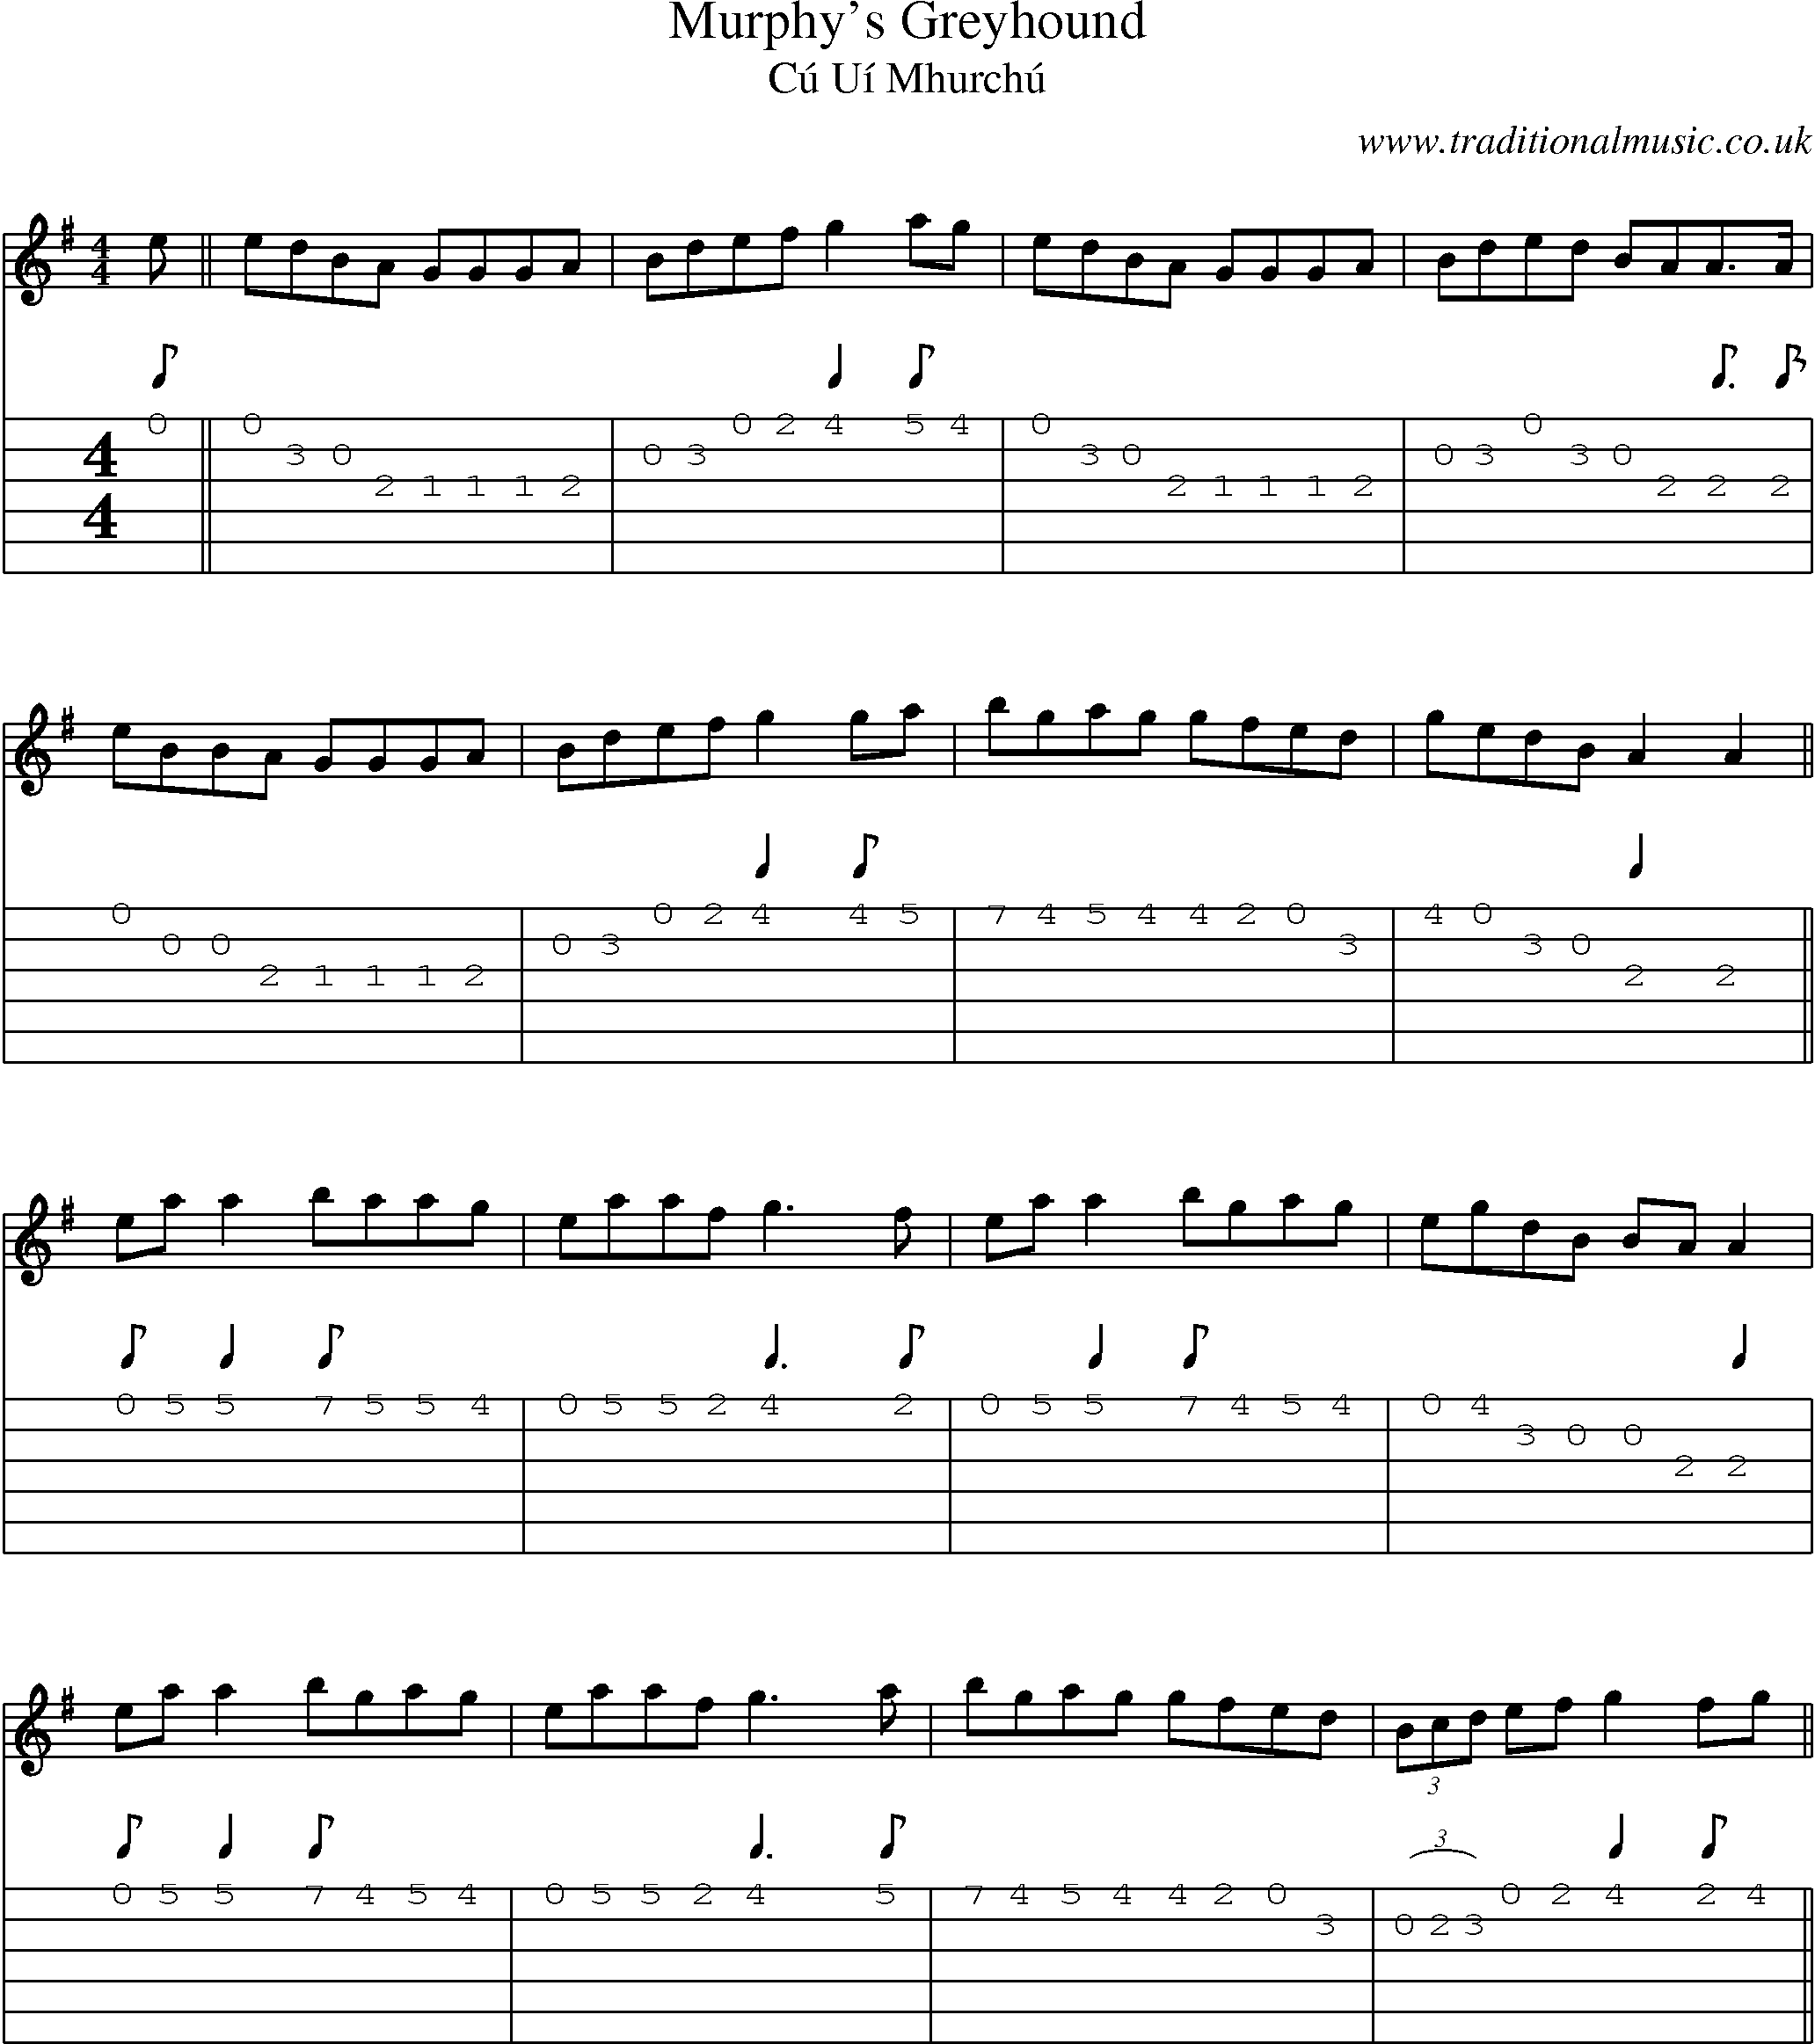 Music Score and Guitar Tabs for Murphys Greyhound